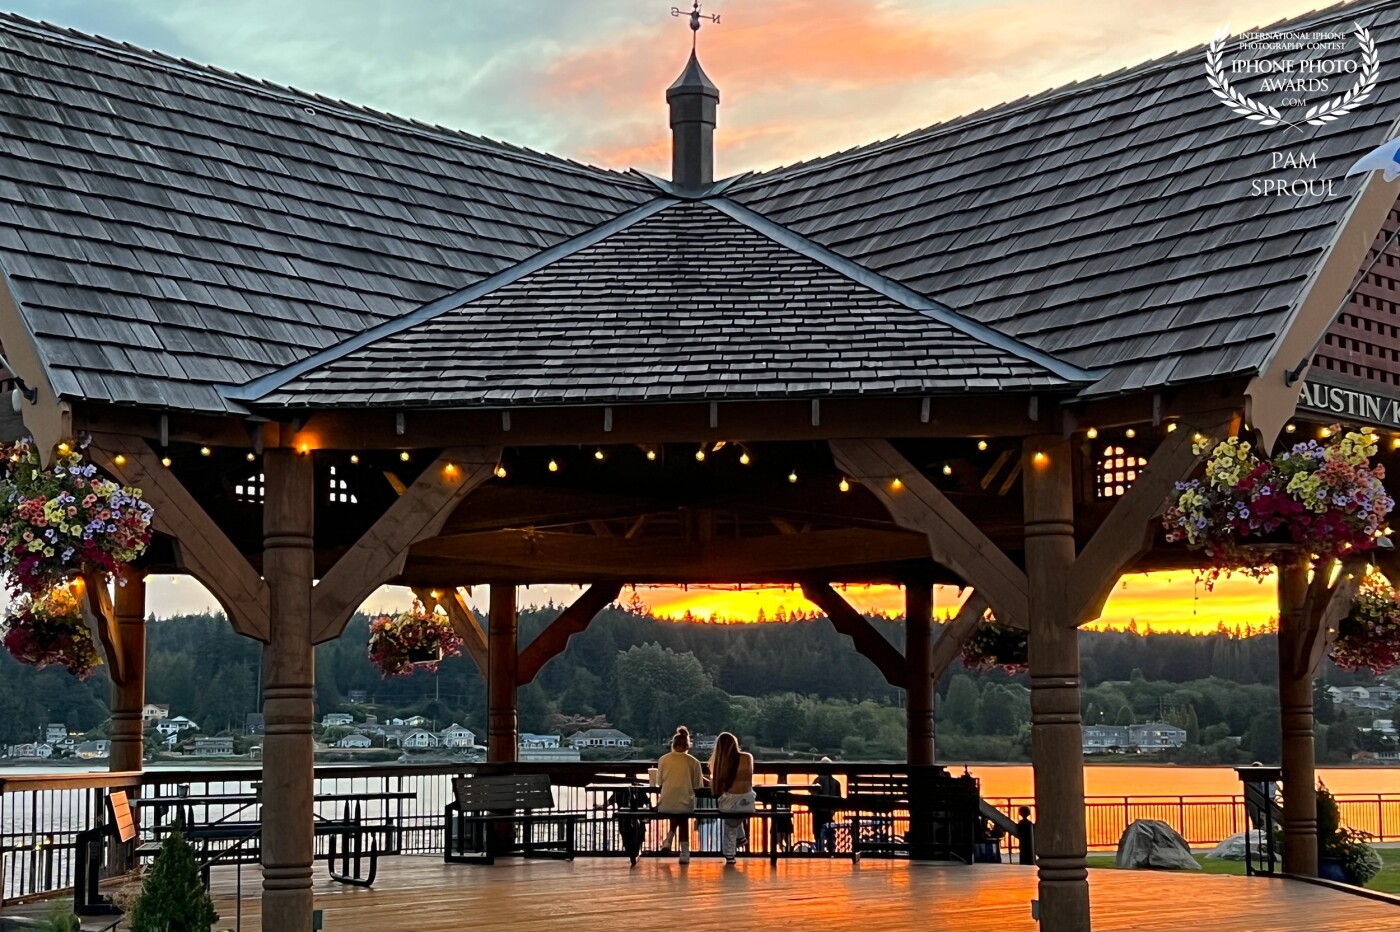 Golden light on Liberty Bays beautiful gazebo. The people framed in the shot were unexpected and added so much to the shot. My iPhone allows me the spontaneity to capture these special moments. Grateful <br />
<br />
#GoldenGazebo 2022